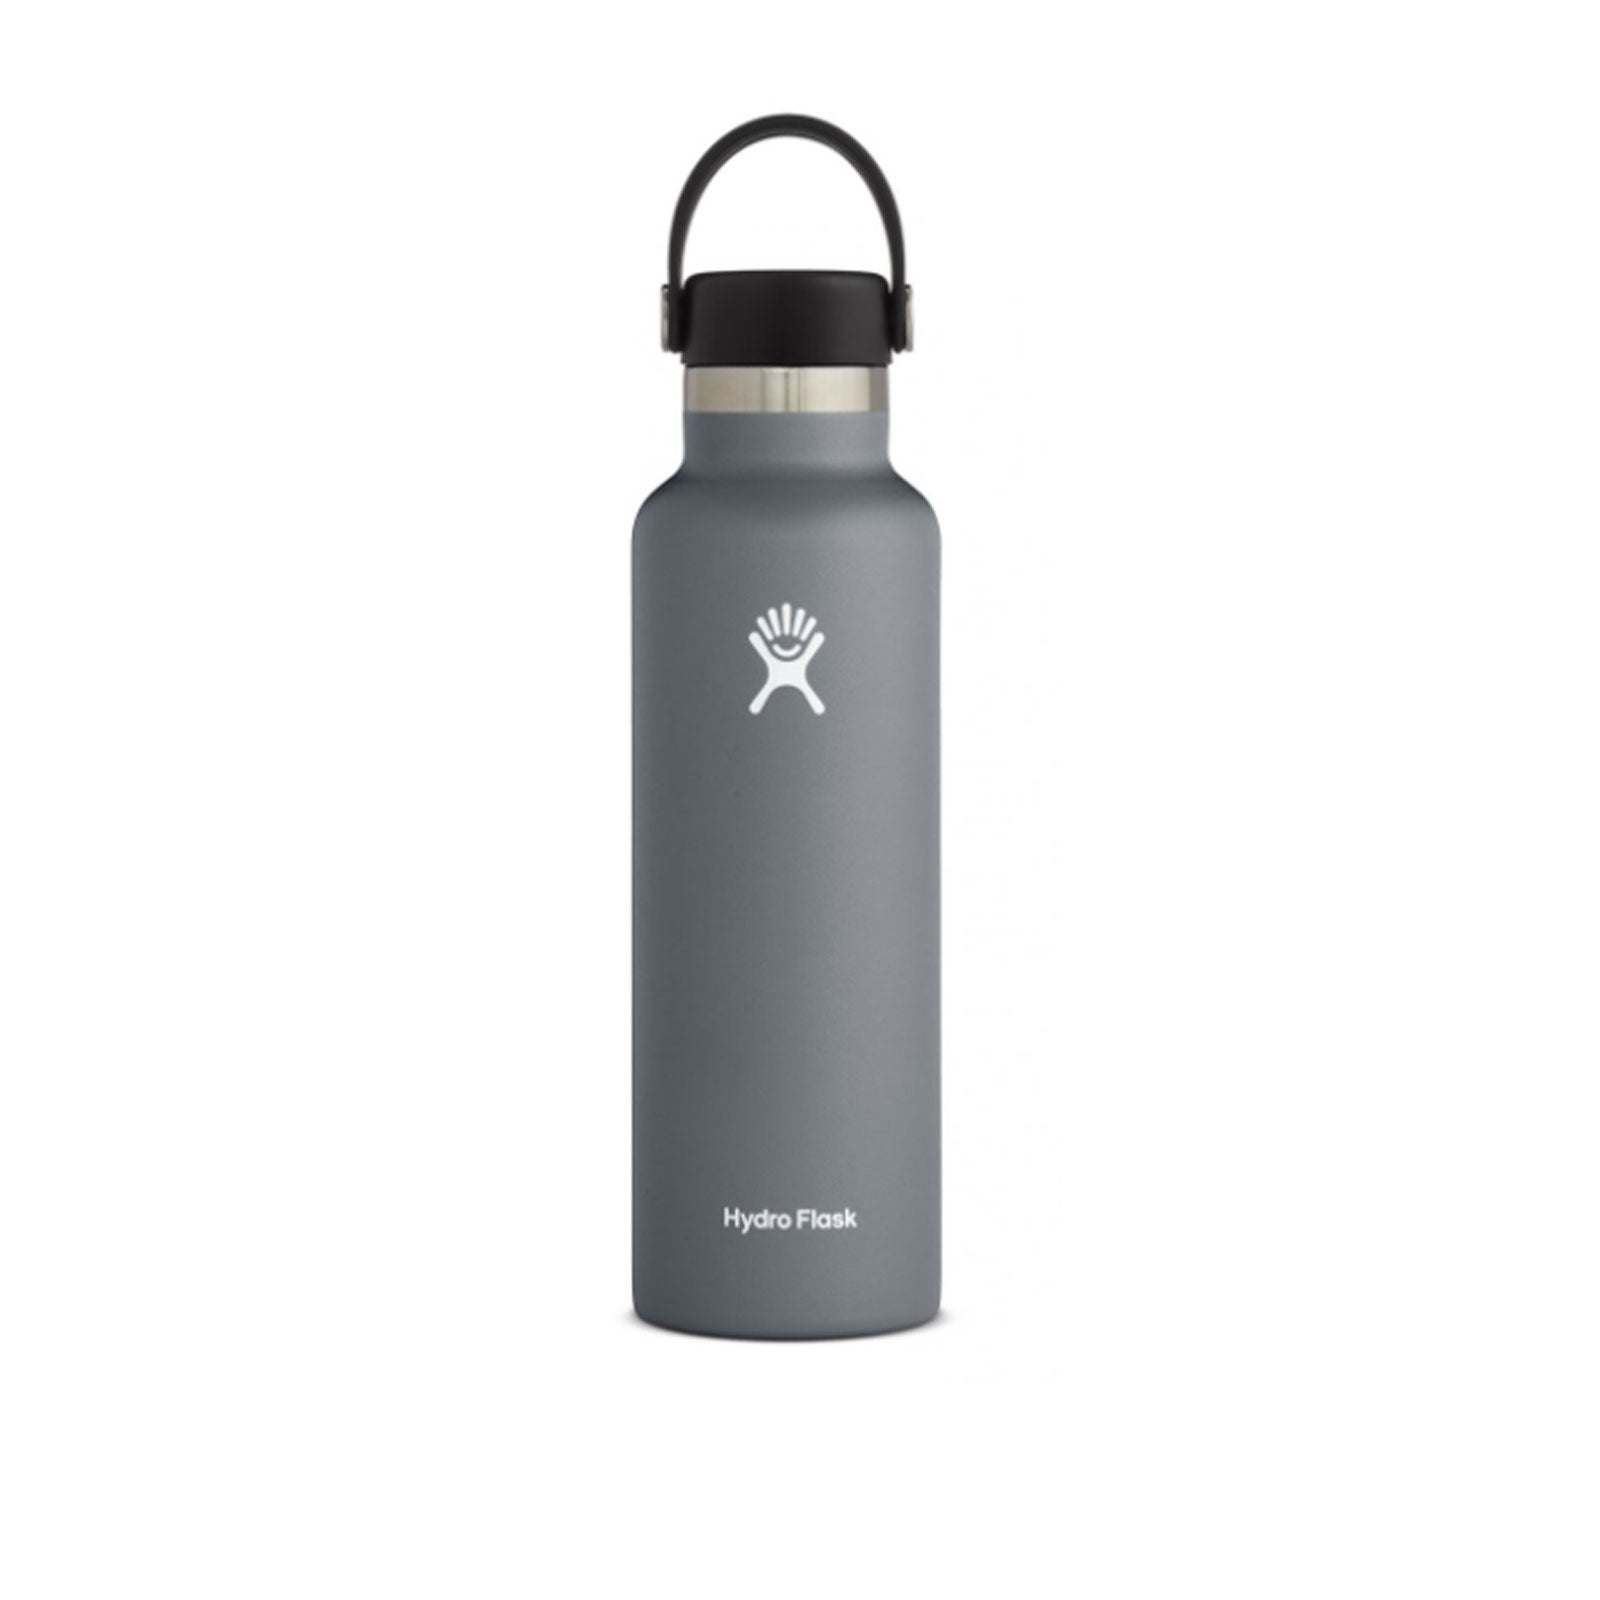 HydroFlask Standard Mouth with Flex Cap 21 oz - Stone Accessories - Drinkware - Canteens - The Heel Shoe Fitters